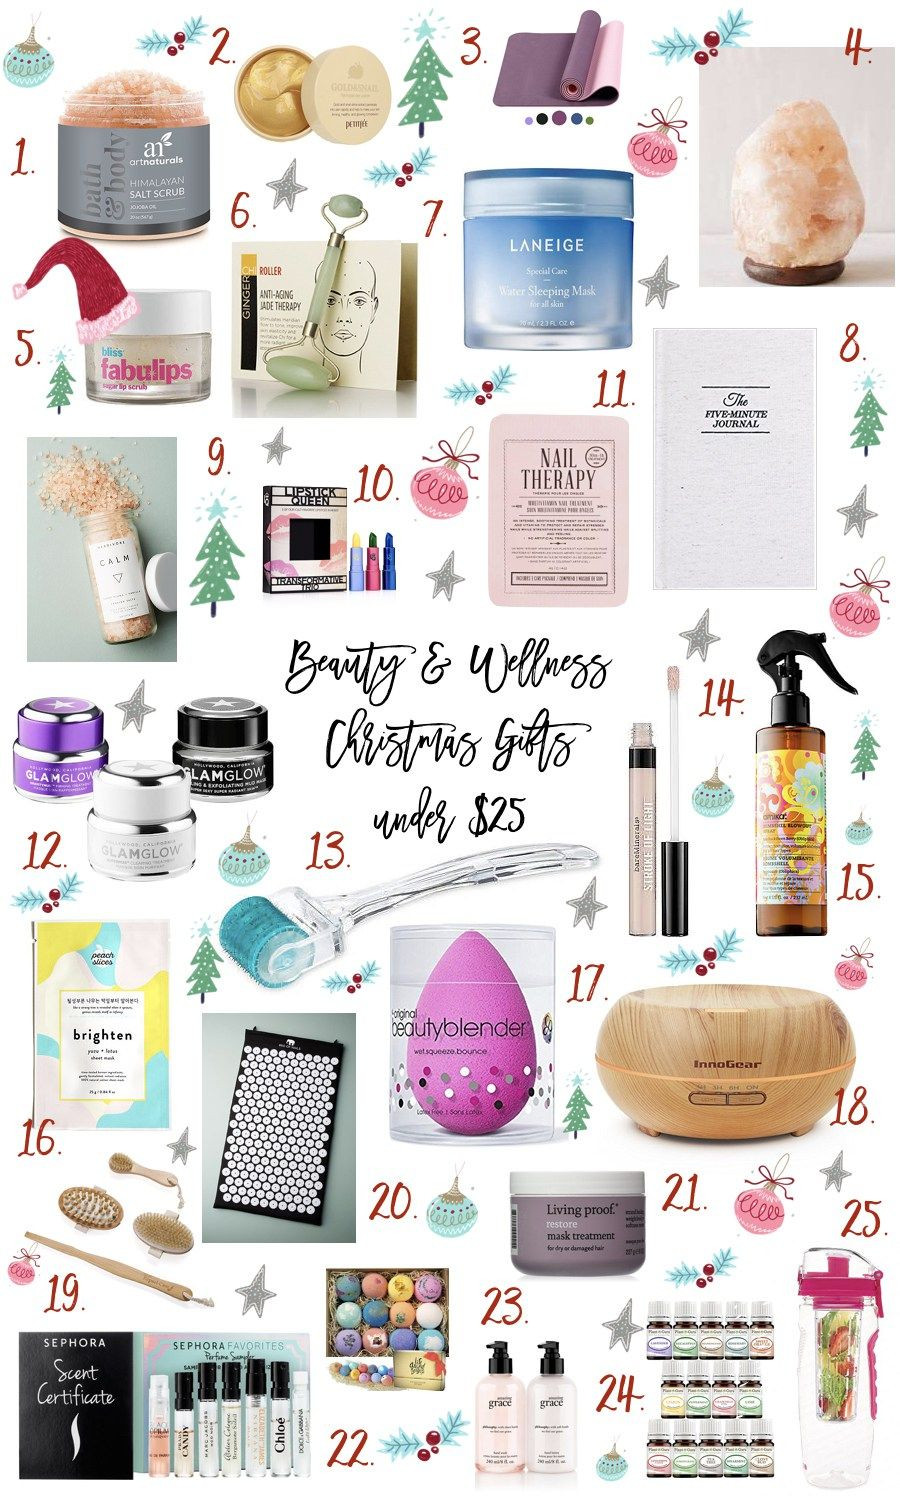 $25 Christmas Gifts
 25 Beauty and Wellness Gifts Under $25